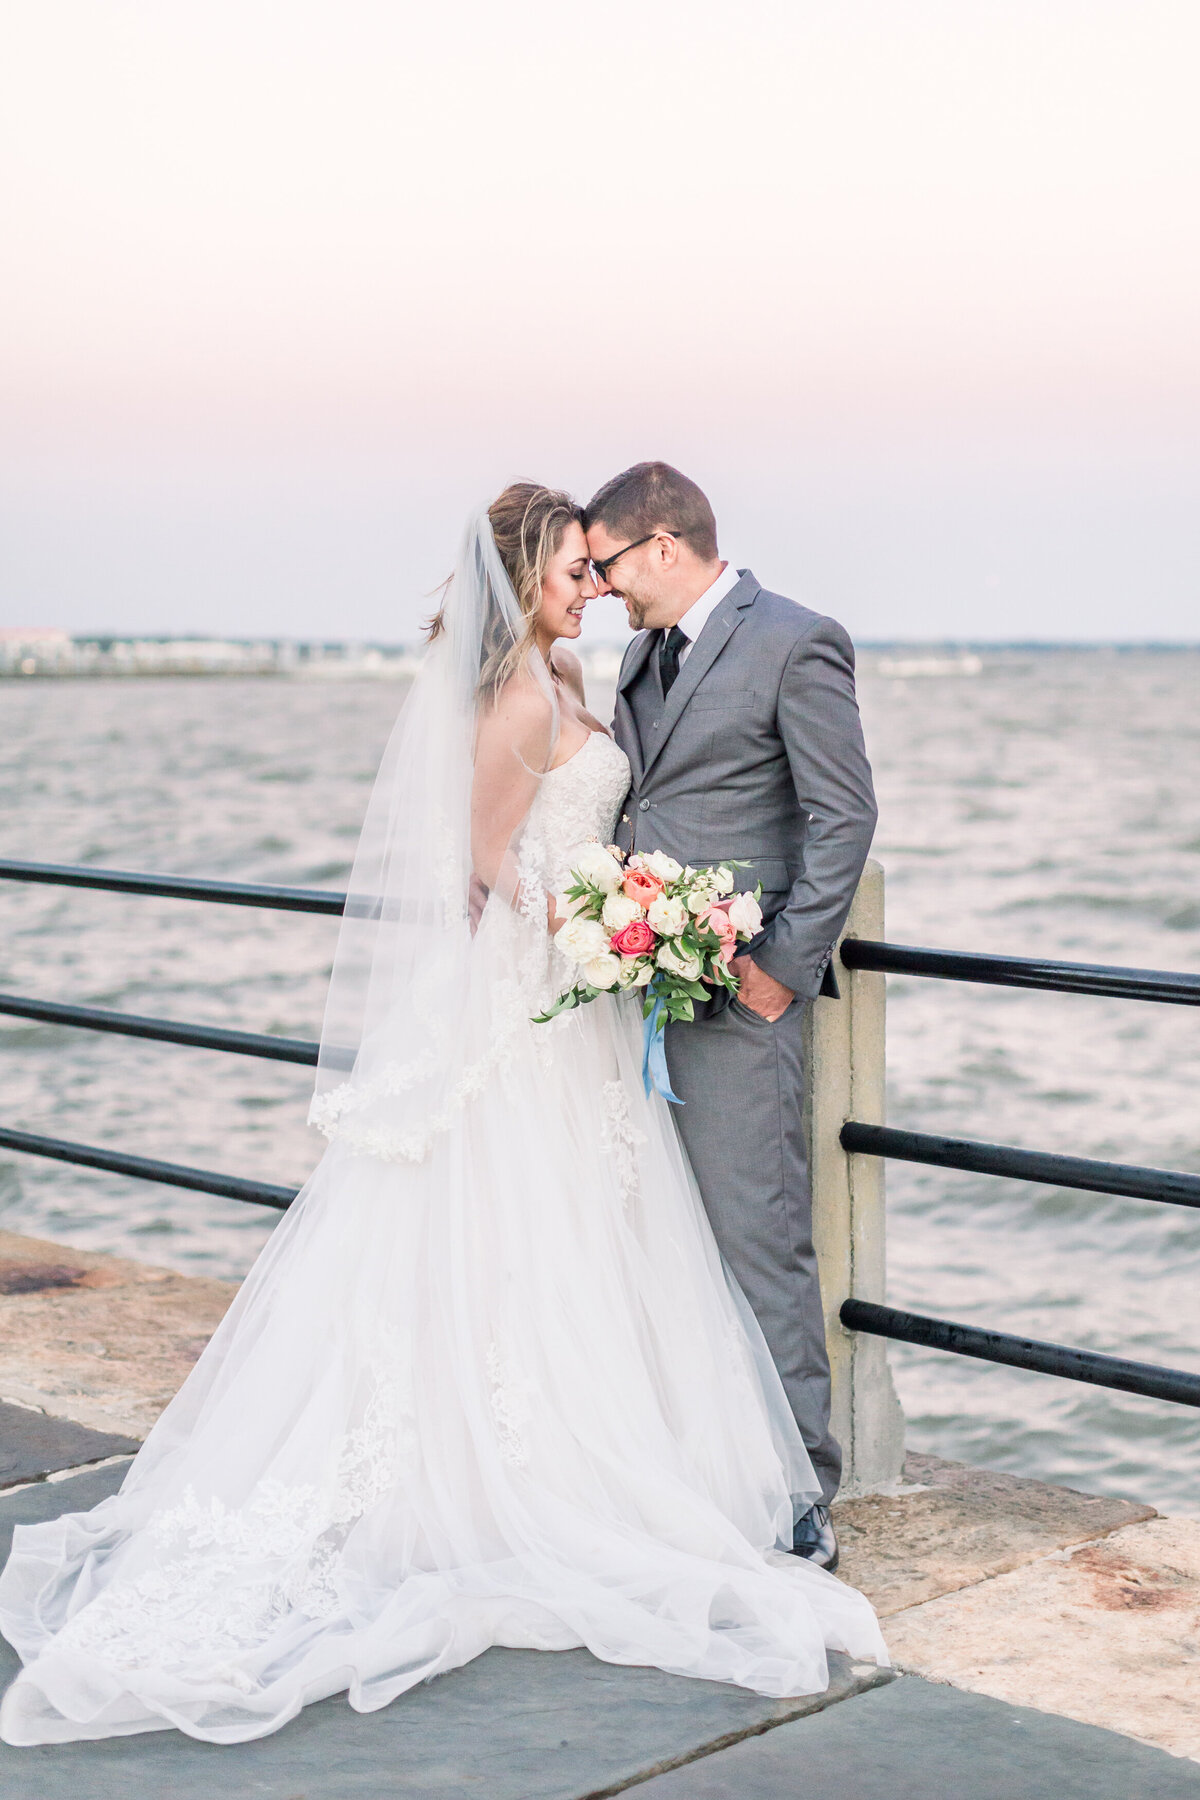 Bride and groom celebrate on dock of Charleston in South Carolina by Karen Schanely